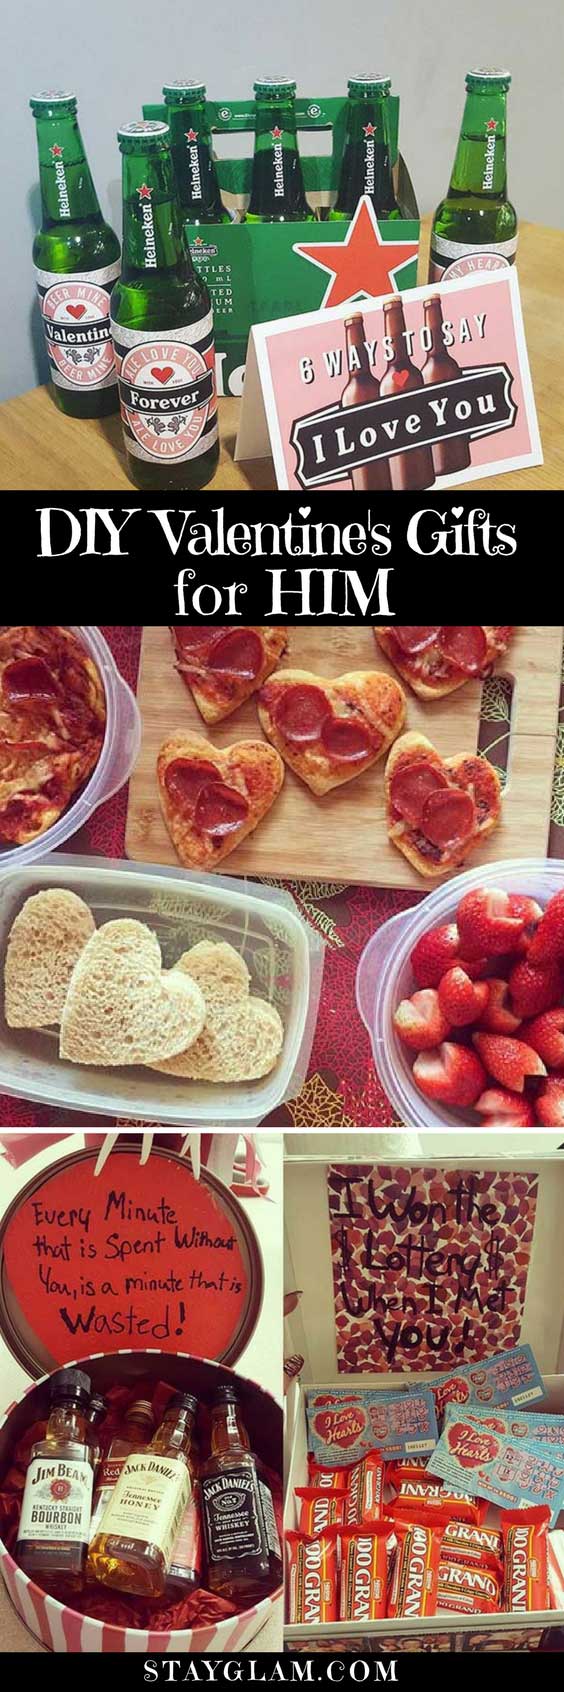 21 Diy Valentine S Gifts For Him Stayglam